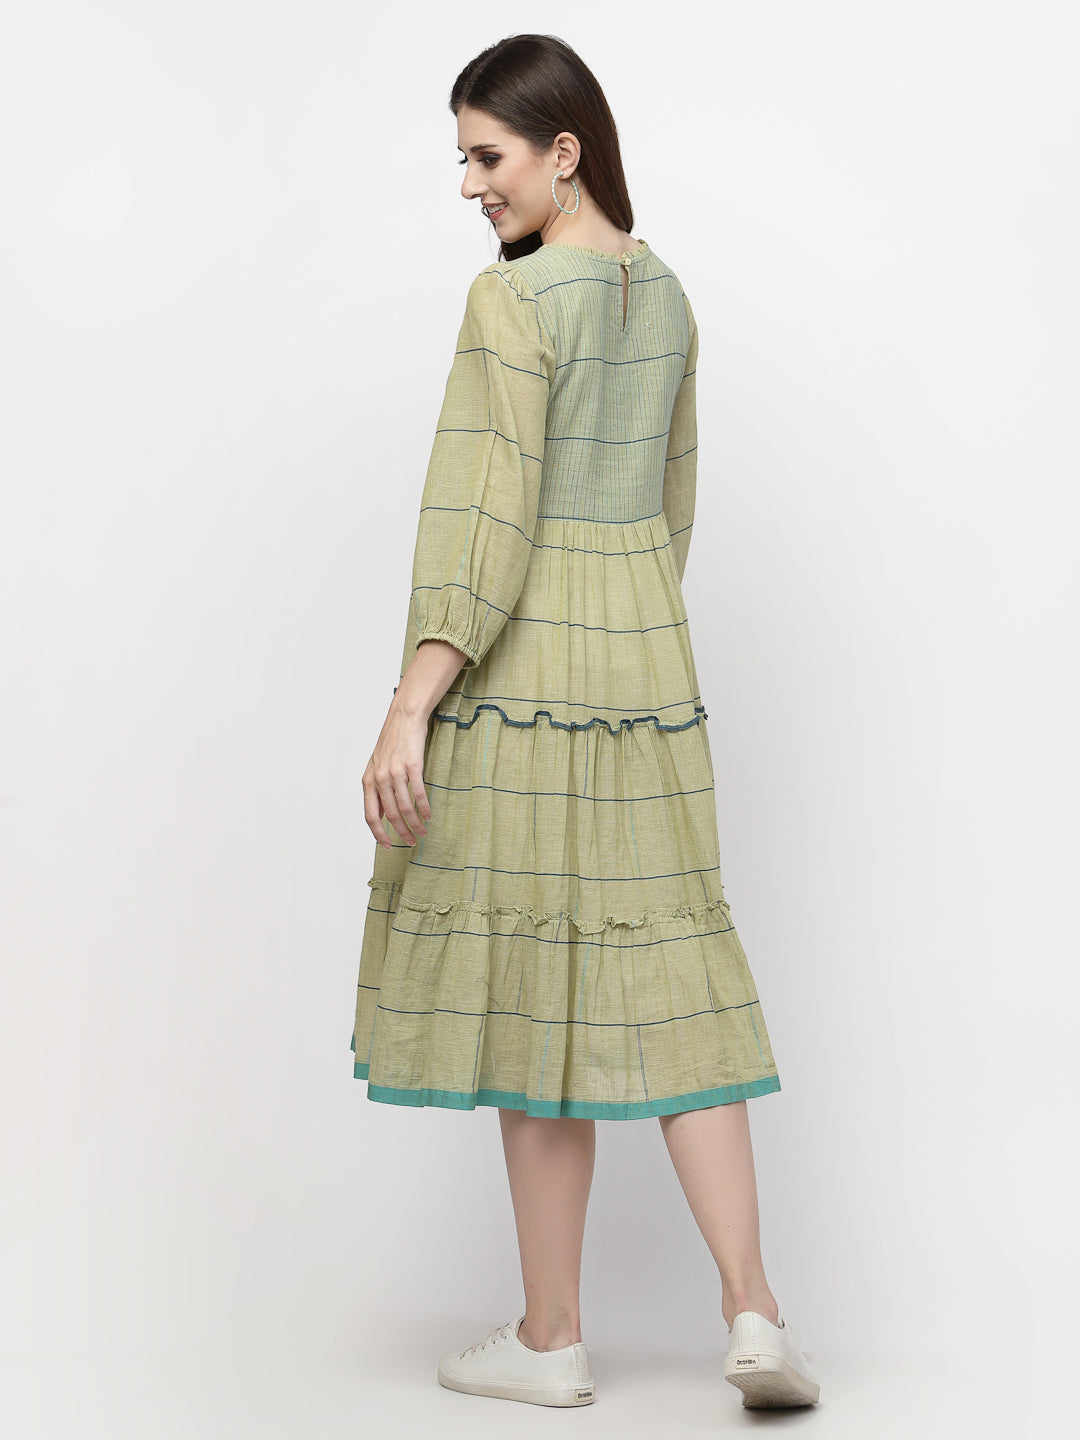 Terquois Green Stripes Woven A-line Dress with Gathers detail and has a Round-neck Dresses TERQUOIS   